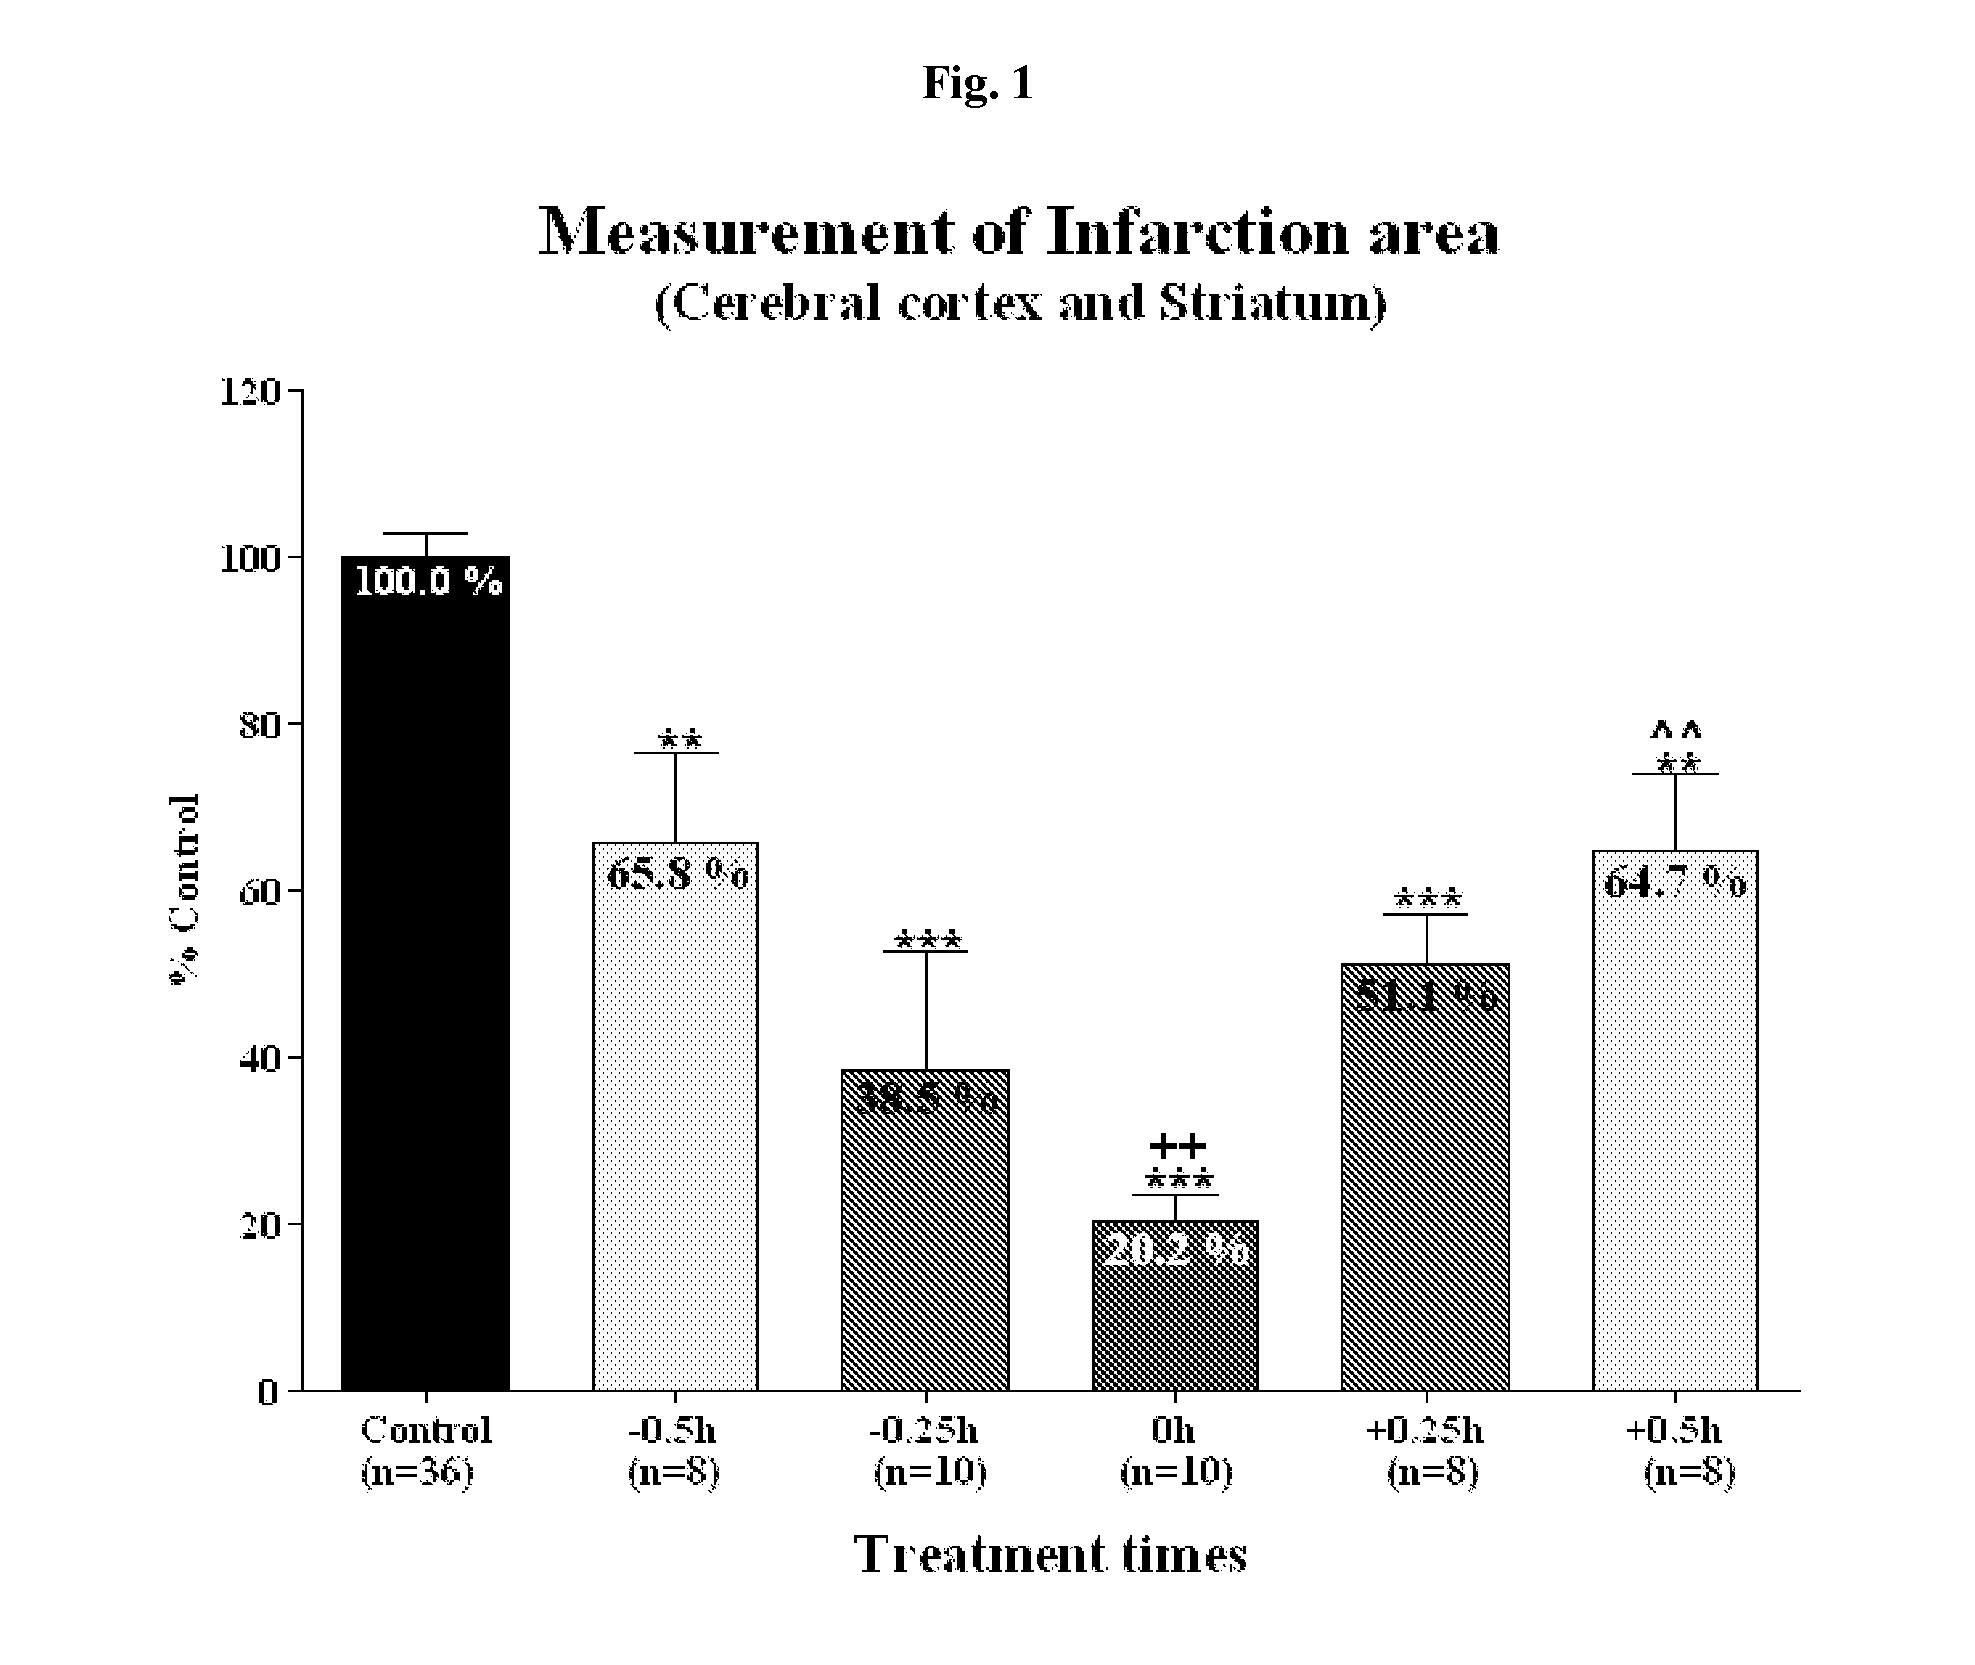 Phenyl carbamate compounds for use in preventing or treating stroke